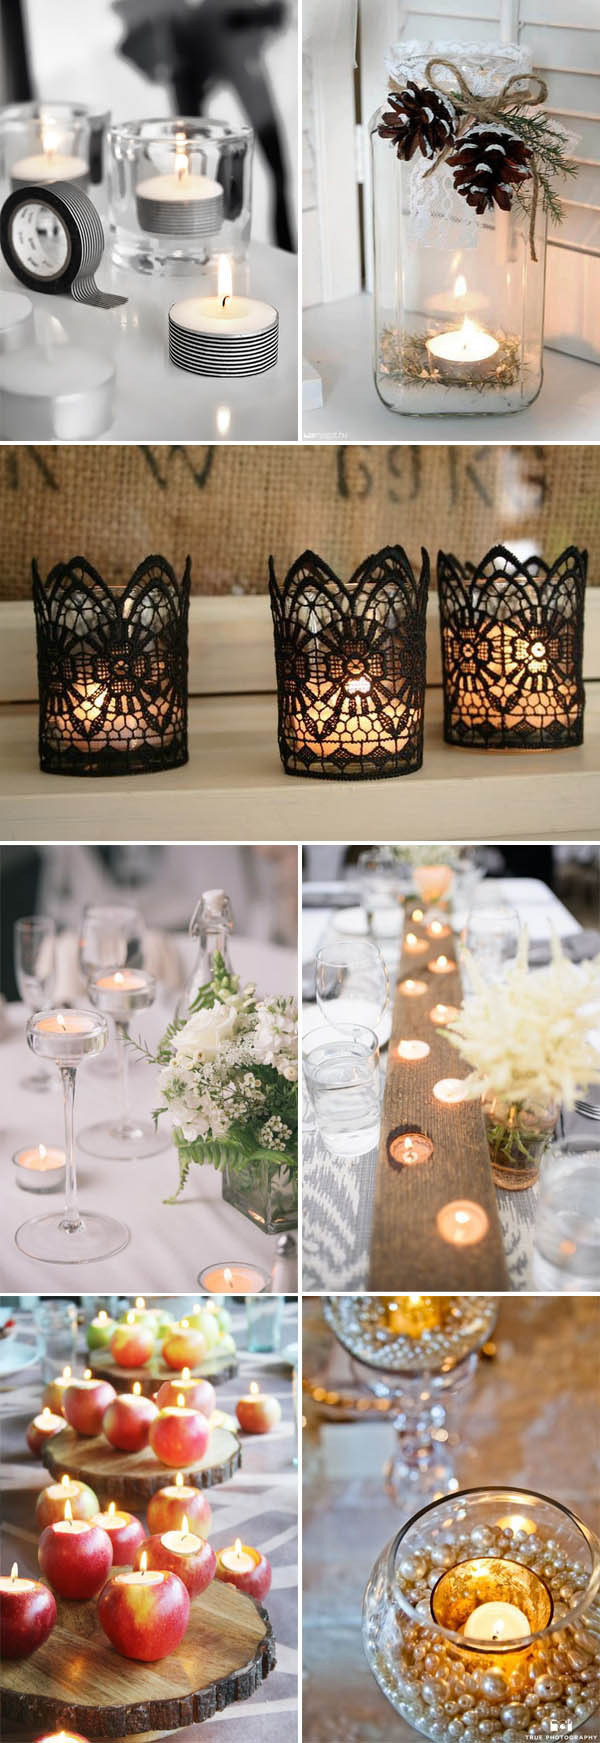 Cheap Wedding Favor Ideas
 Cheap Decorative Candle Wedding Favors and DIY Candle